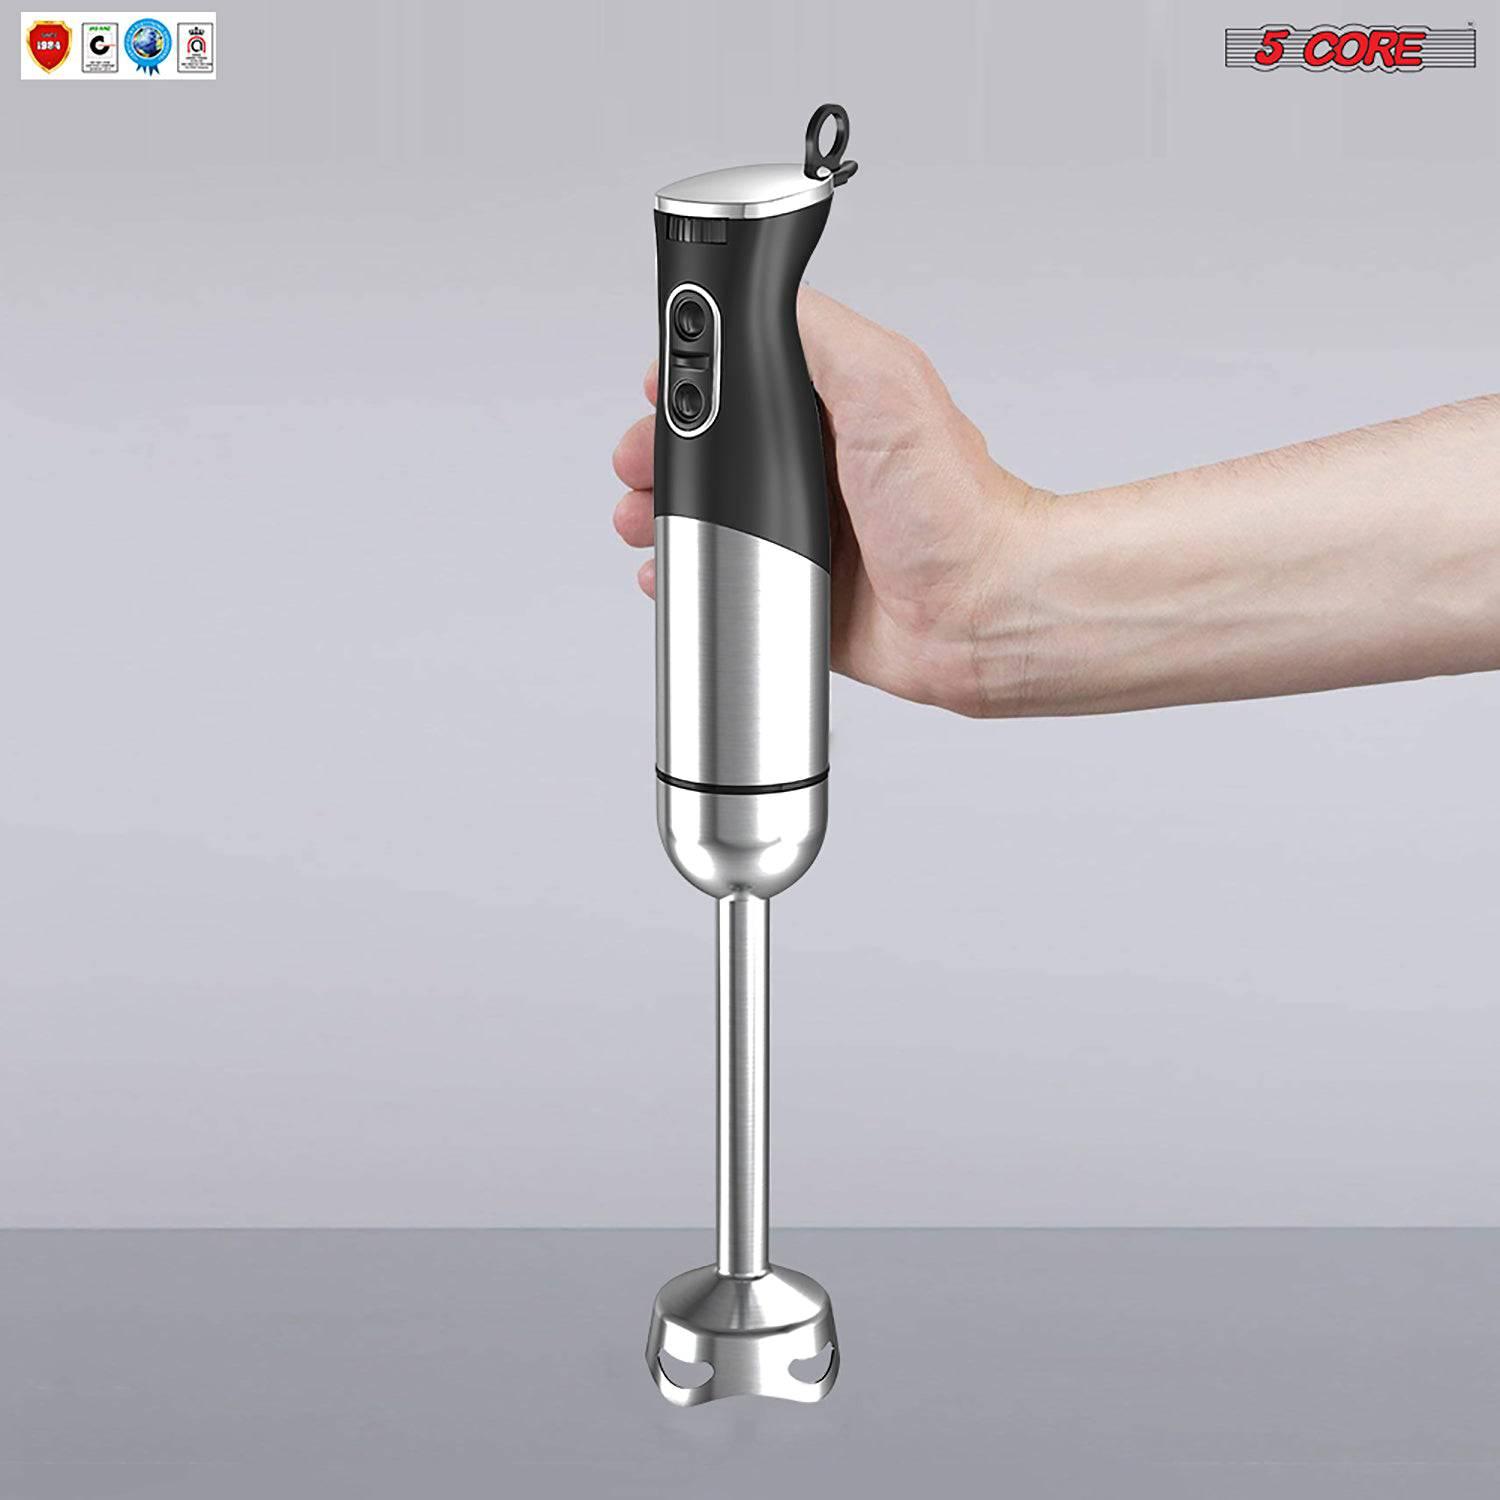 5Core 400W Immersion Hand Blender Multifunctional Electric 8 speed 2 - VirtuousWares:Global